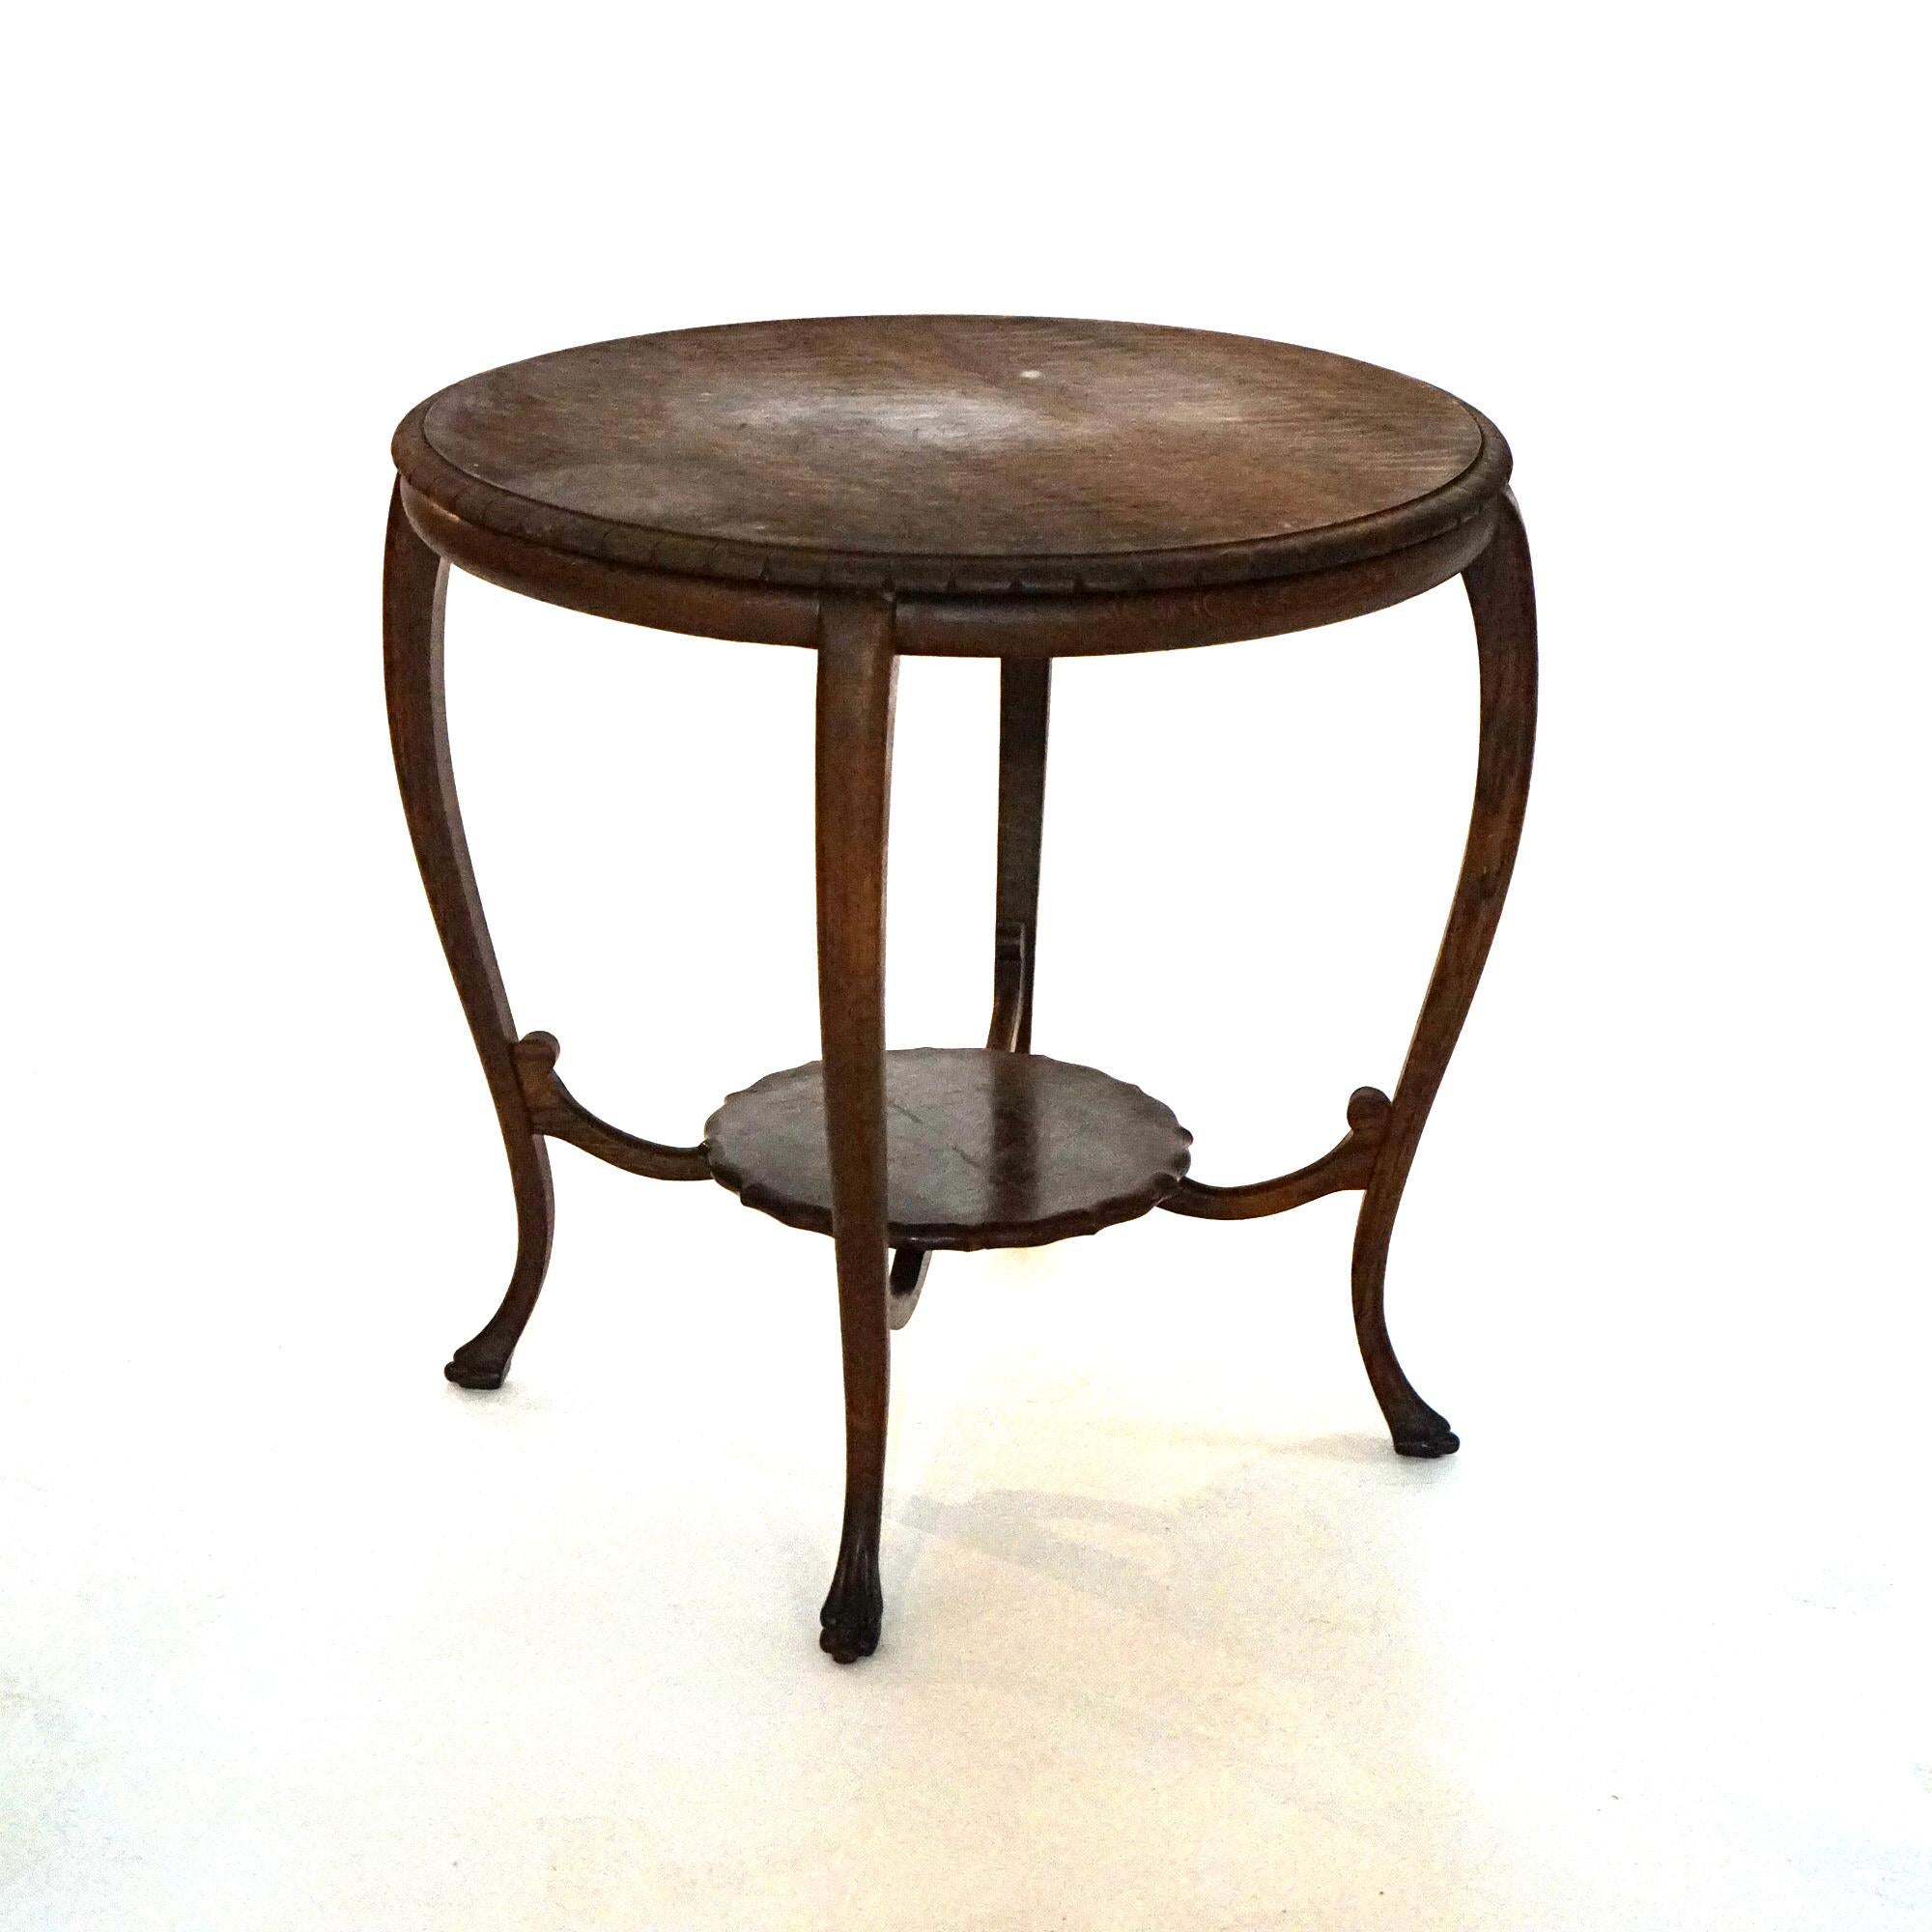 An antique parlor center table offers quarter sawn oak construction with circular top raised on cabriole legs terminating in carved paw feet and having lower scalloped display with scroll form stretchers, c1900

Measures- 29.5'' H x 31.25'' W x